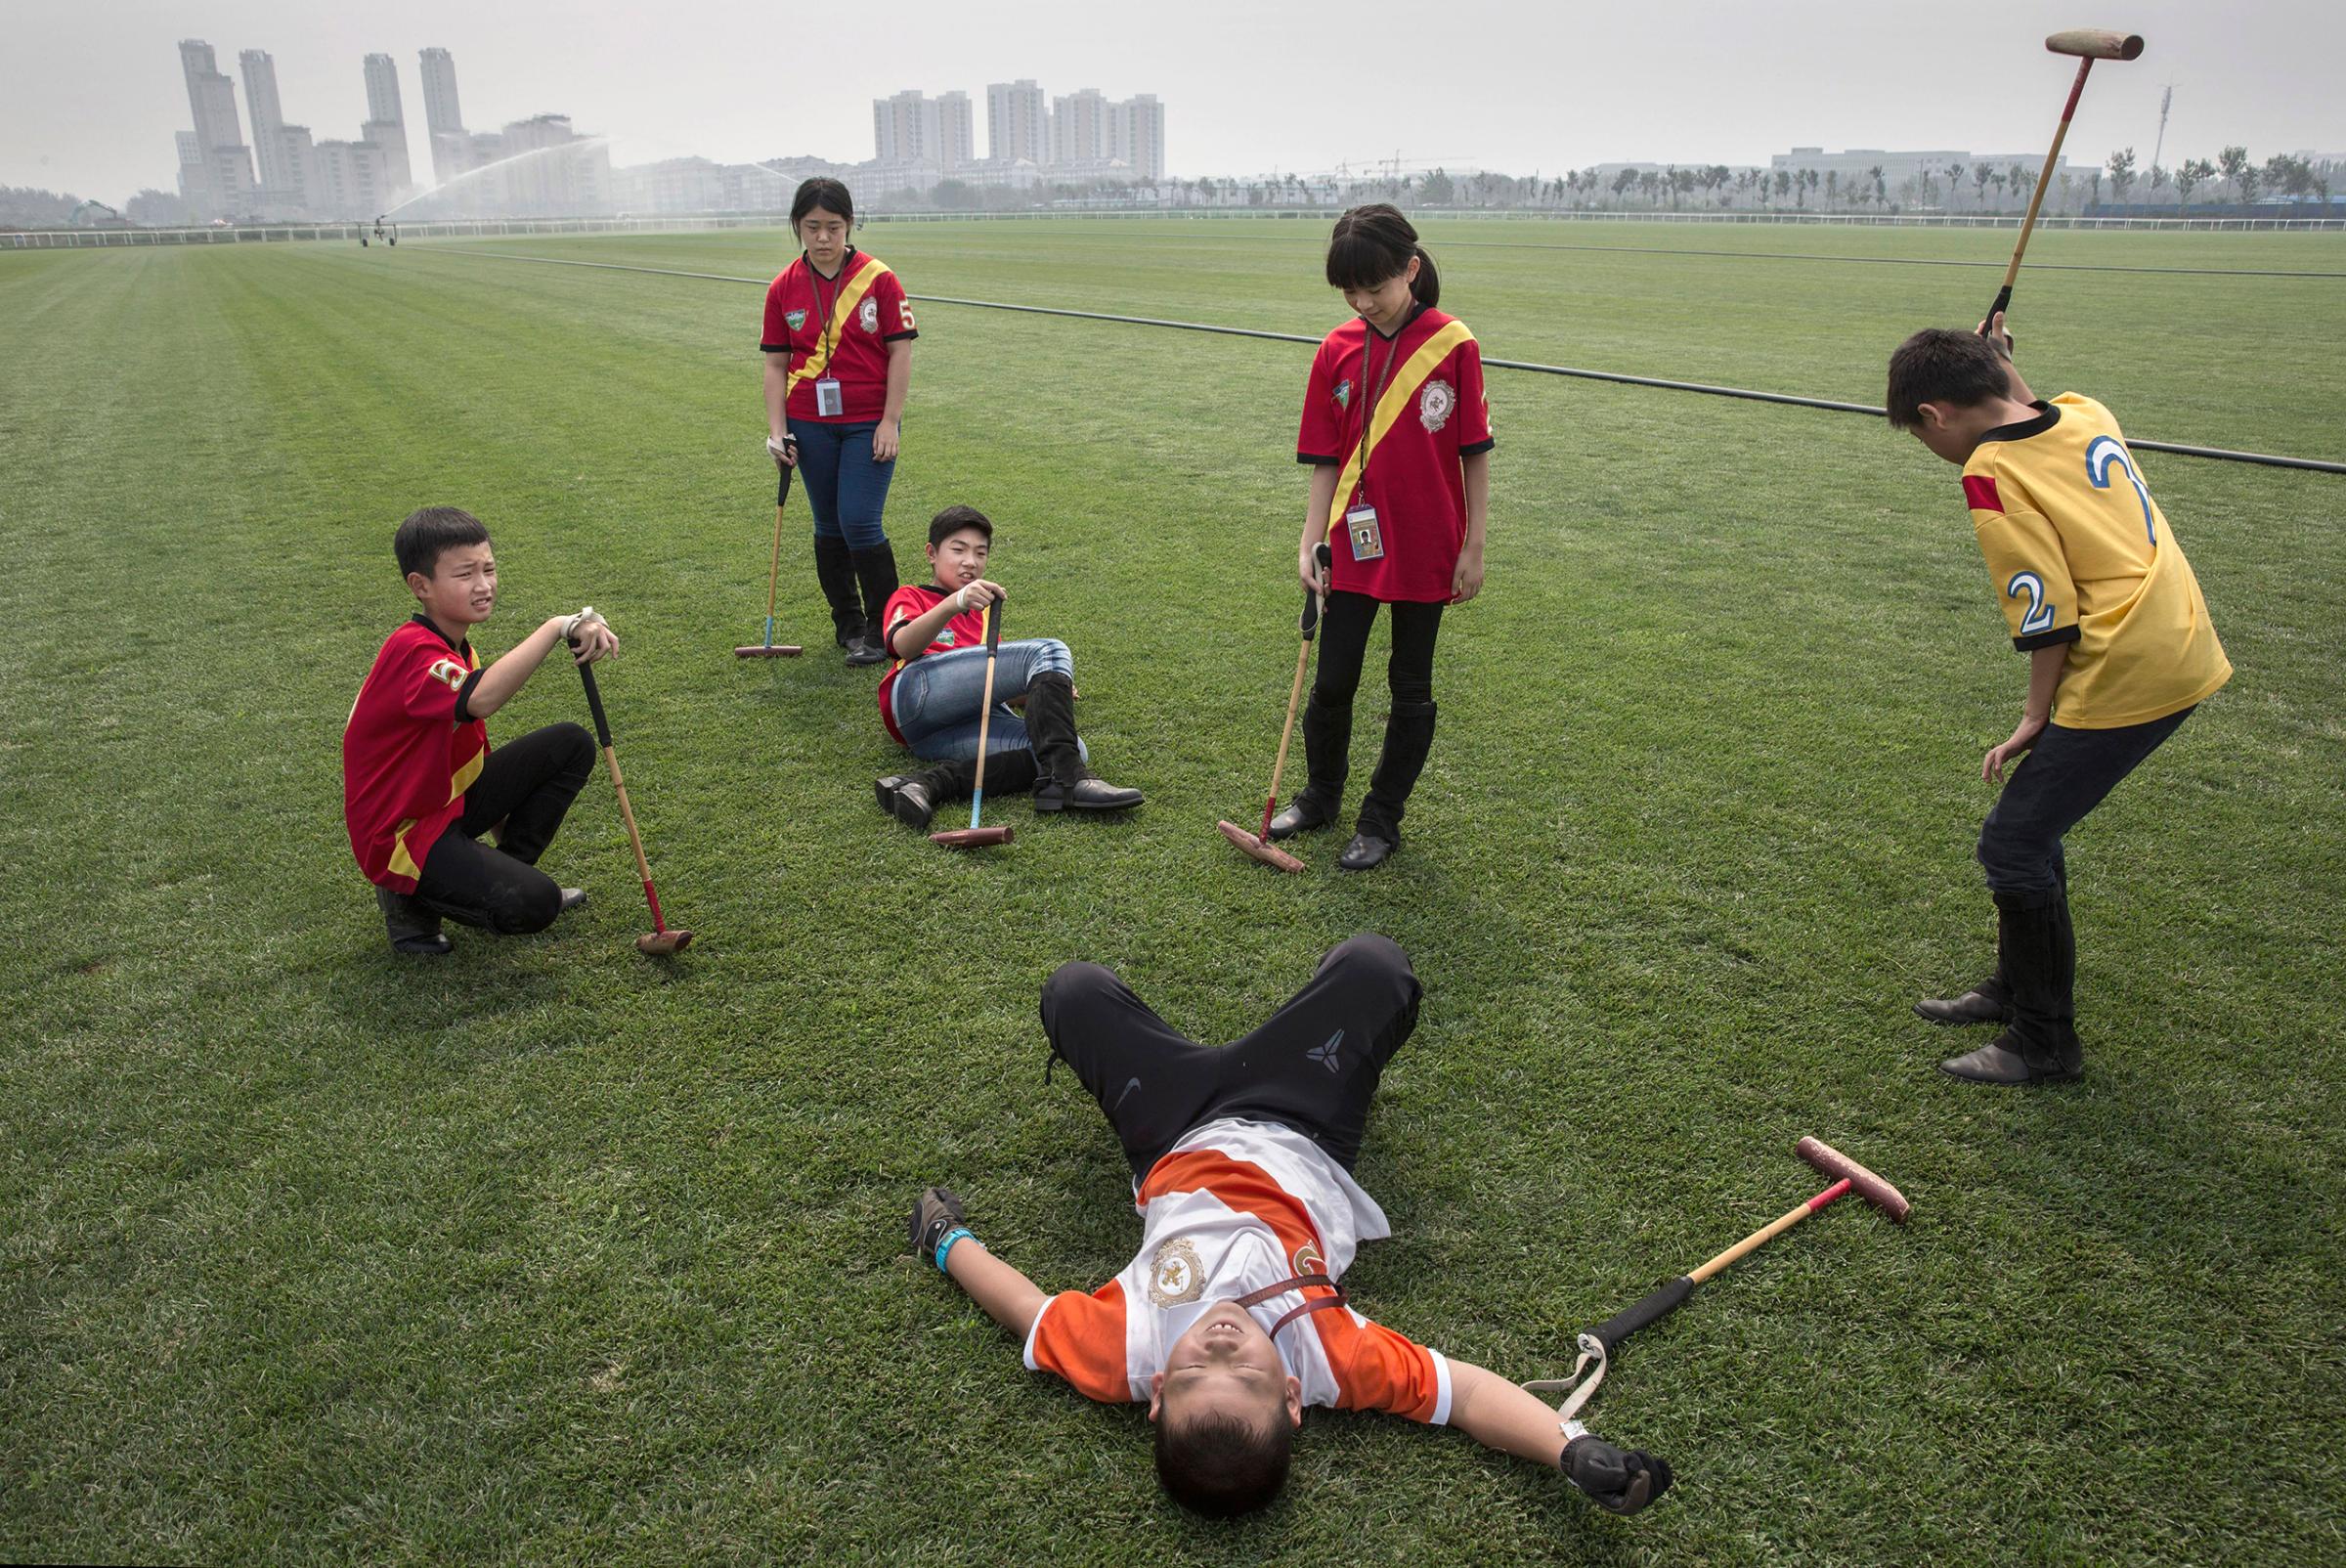 Young Chinese players from the Junior Polo Program take a break during stick and ball training at a summer camp held at the Tianjin Goldin Metropolitan Polo Club in Tianjin, China, on July 17, 2016.